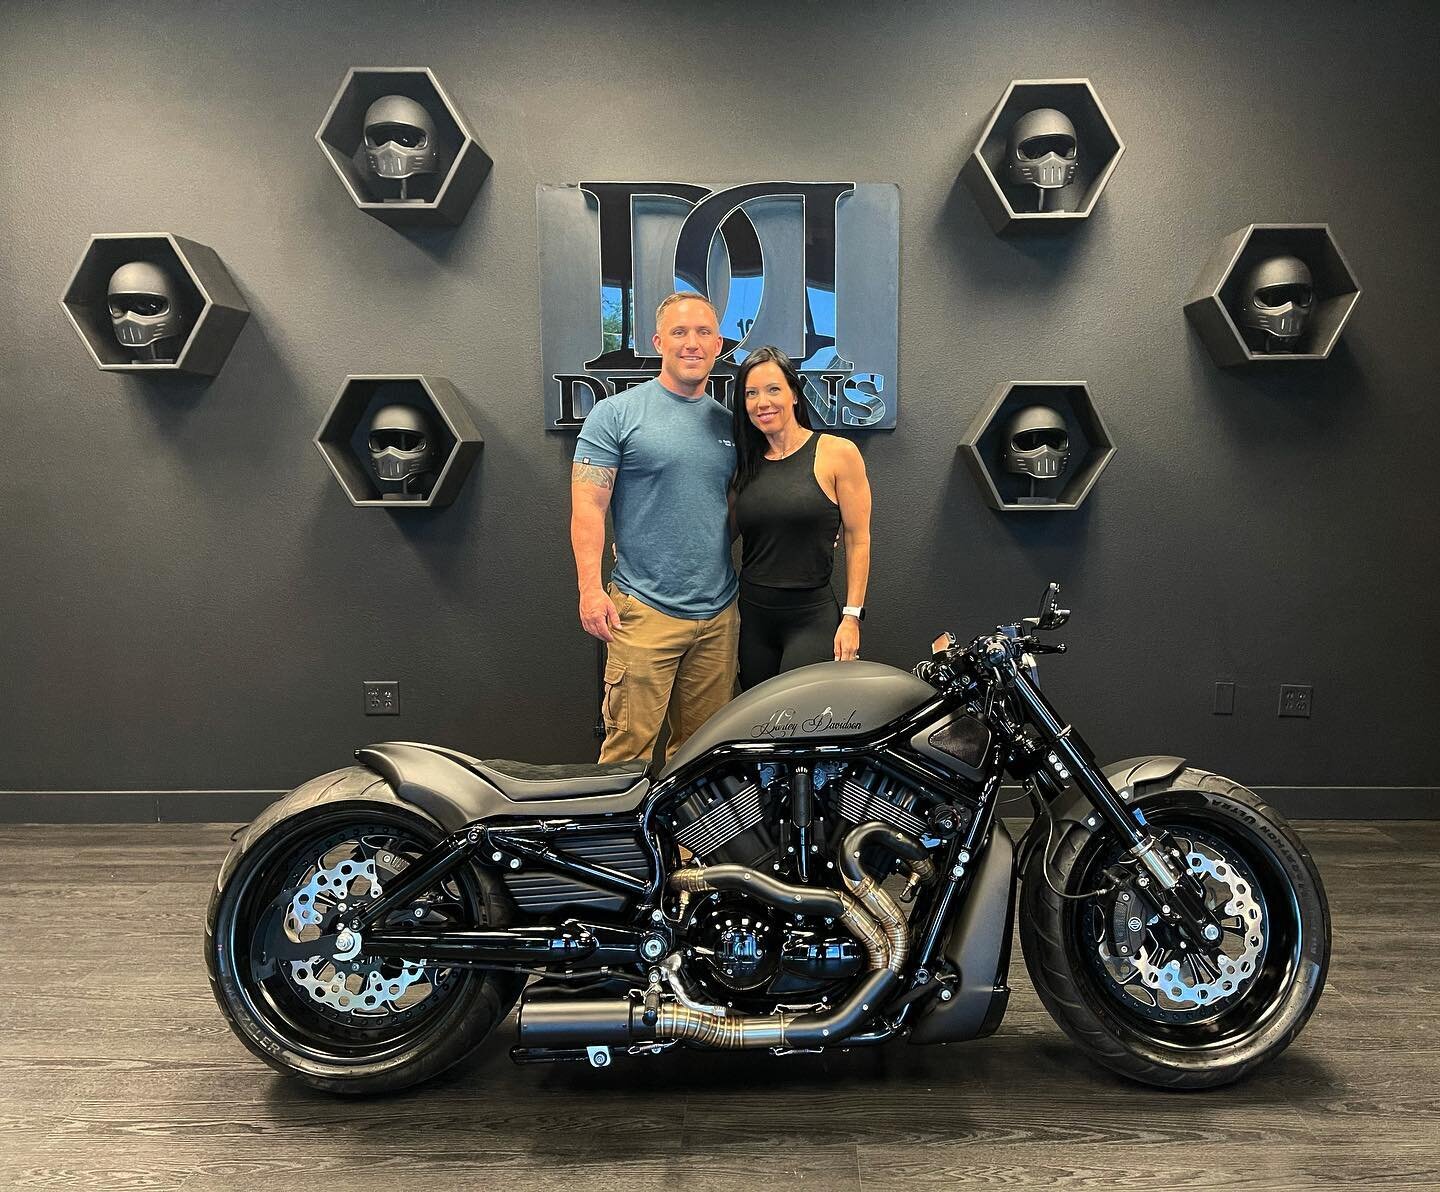 Another customer came to our new showroom to take delivery of his custom build! 🤩⛓
More details on this build soon. 

#DDDesigns #VRod #Nightrod #VRSCDX #custom #HarleyDavidson #Design #1250cc  #custommotorcycle #LasVegas #YouTube #DDCustomDesigns #